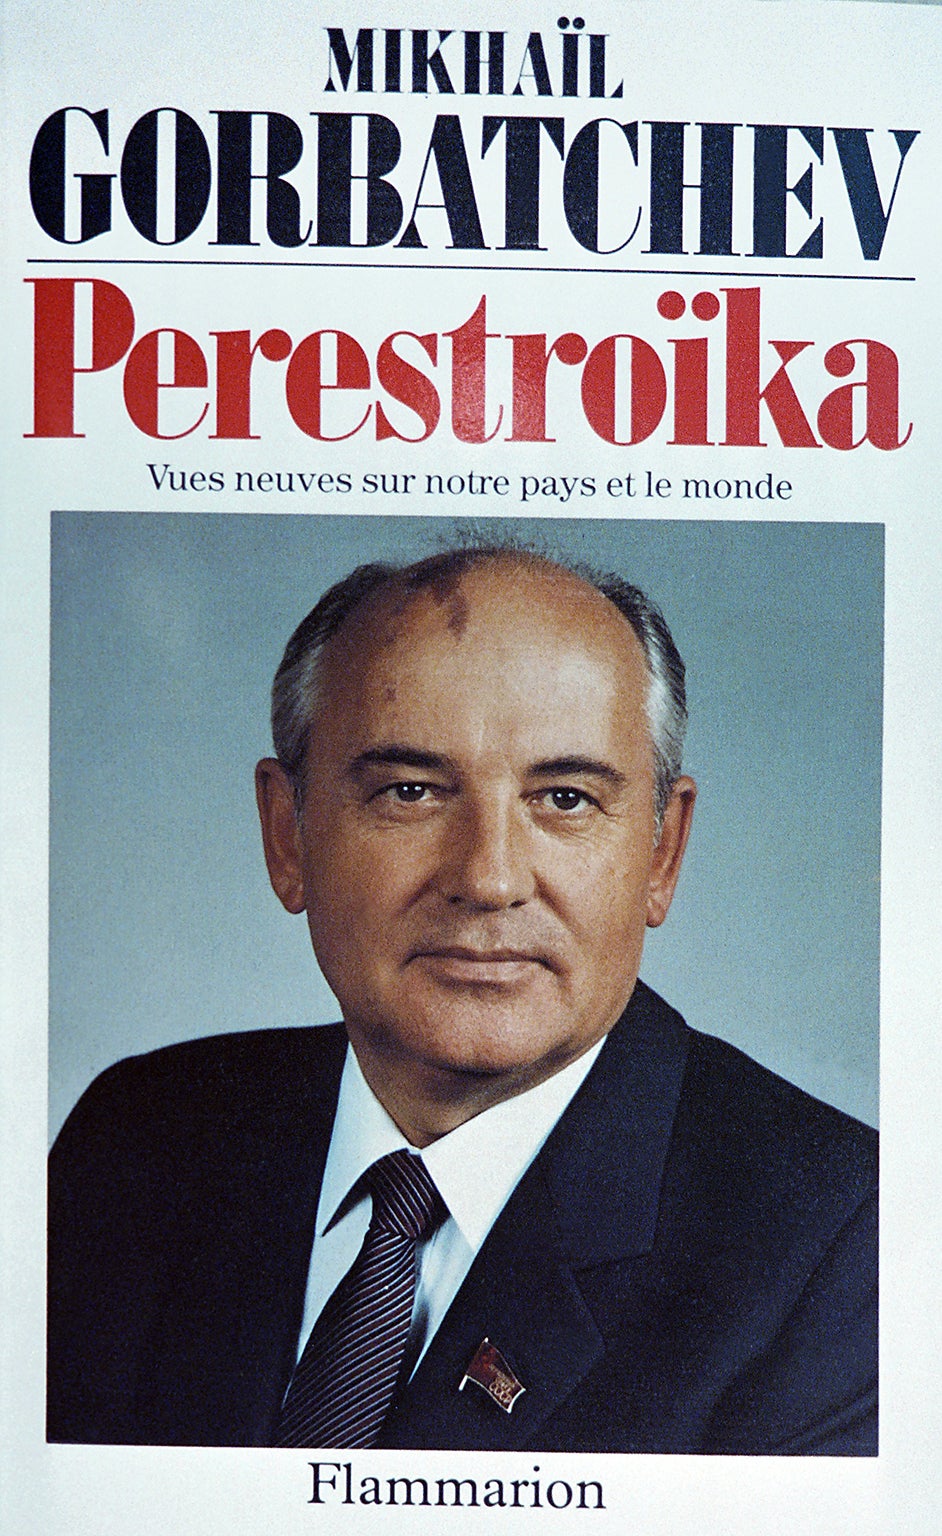 Gorbachev's book ‘Perestroika’, the name given to his restructuring of communism that became part of its downfall (Getty)